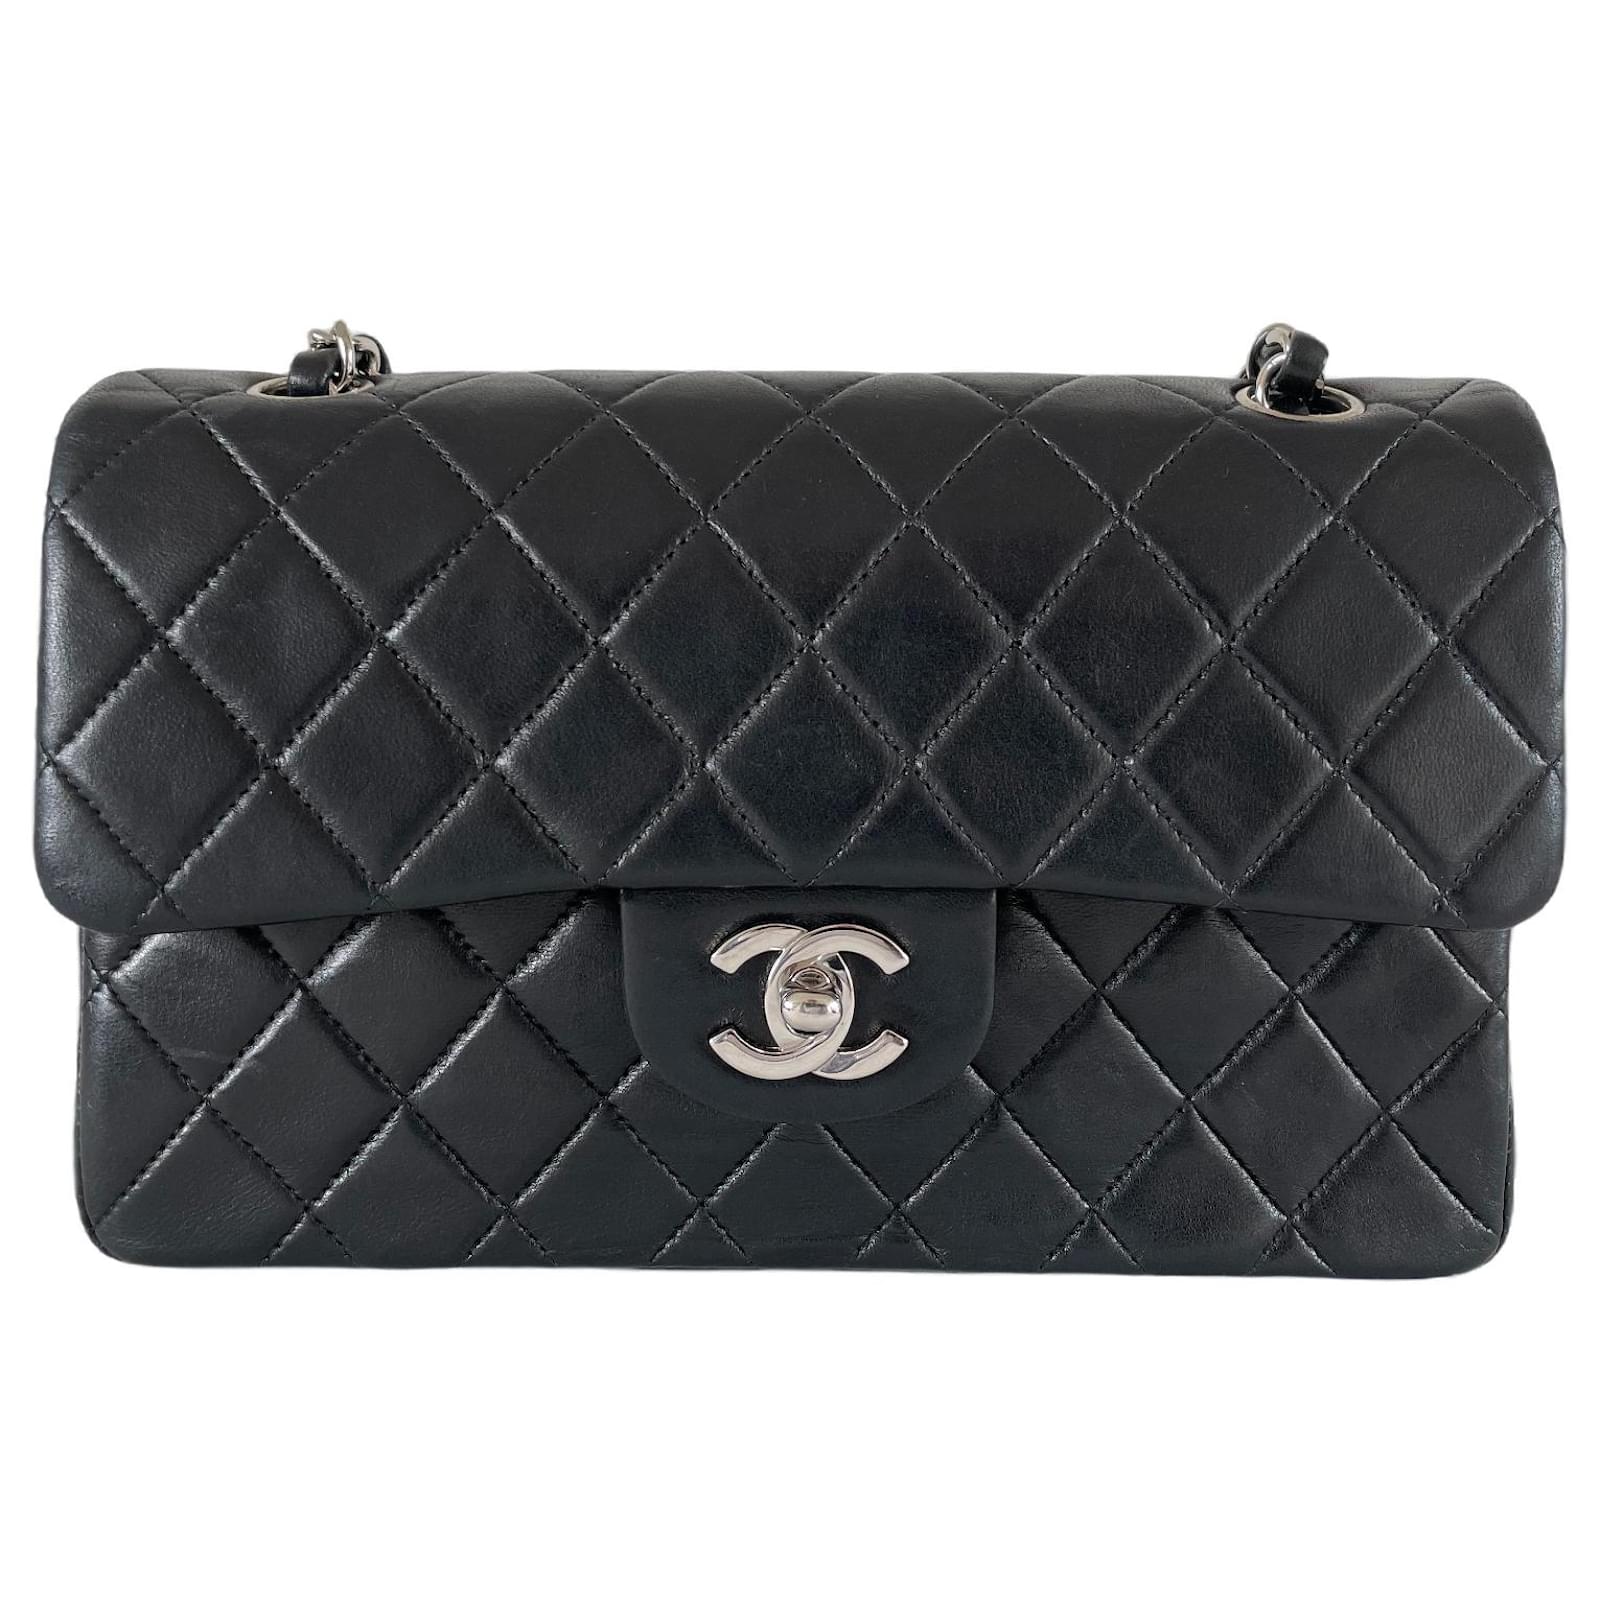 Chanel classic lined flap small silver hardware vintage black lambskin  timeless